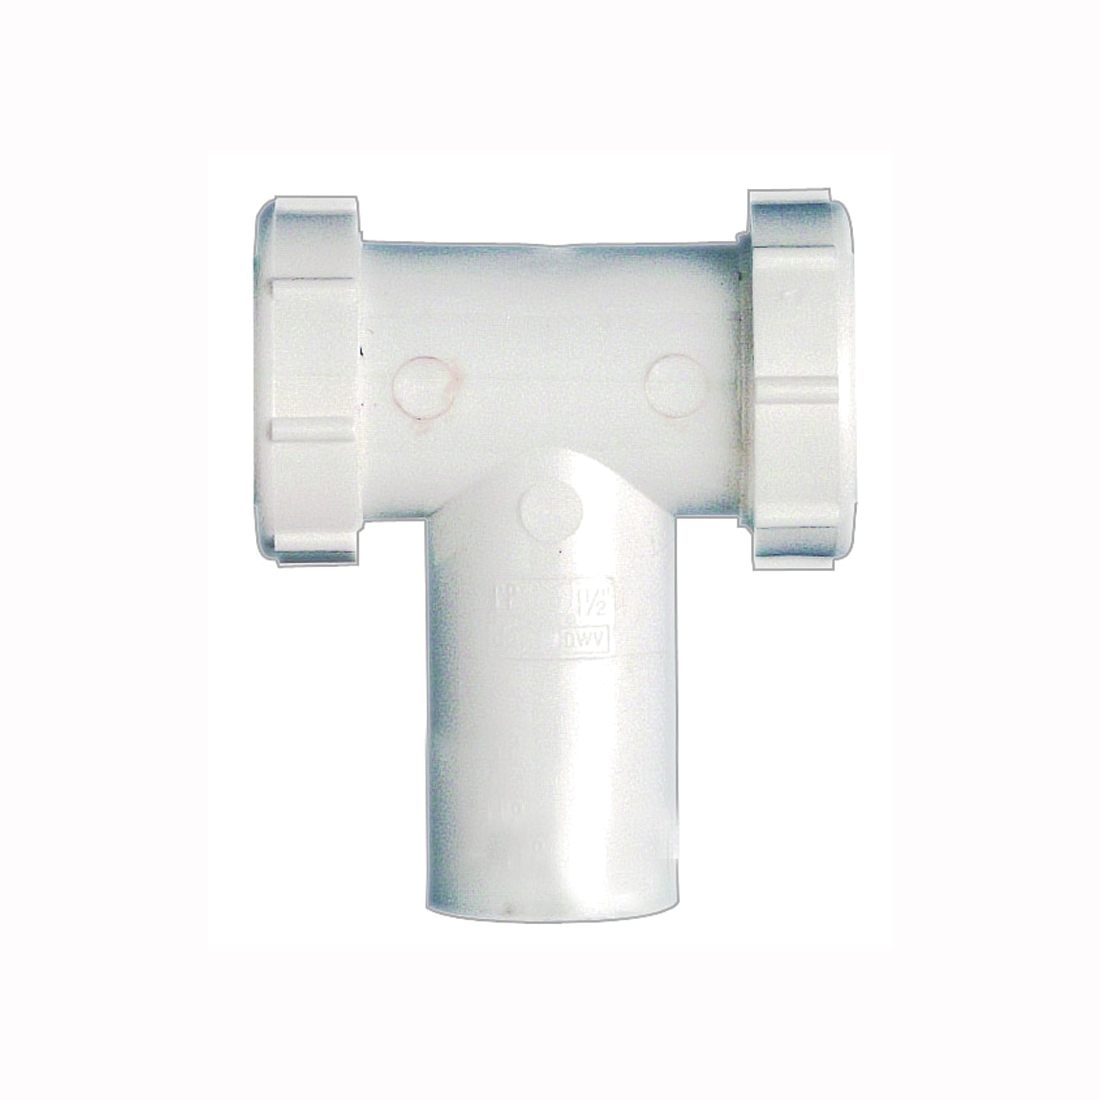 Plumb Pak PP20667 Center Outlet and Tailpiece, 1-1/2 in, Slip-Joint, Plastic, White - 1